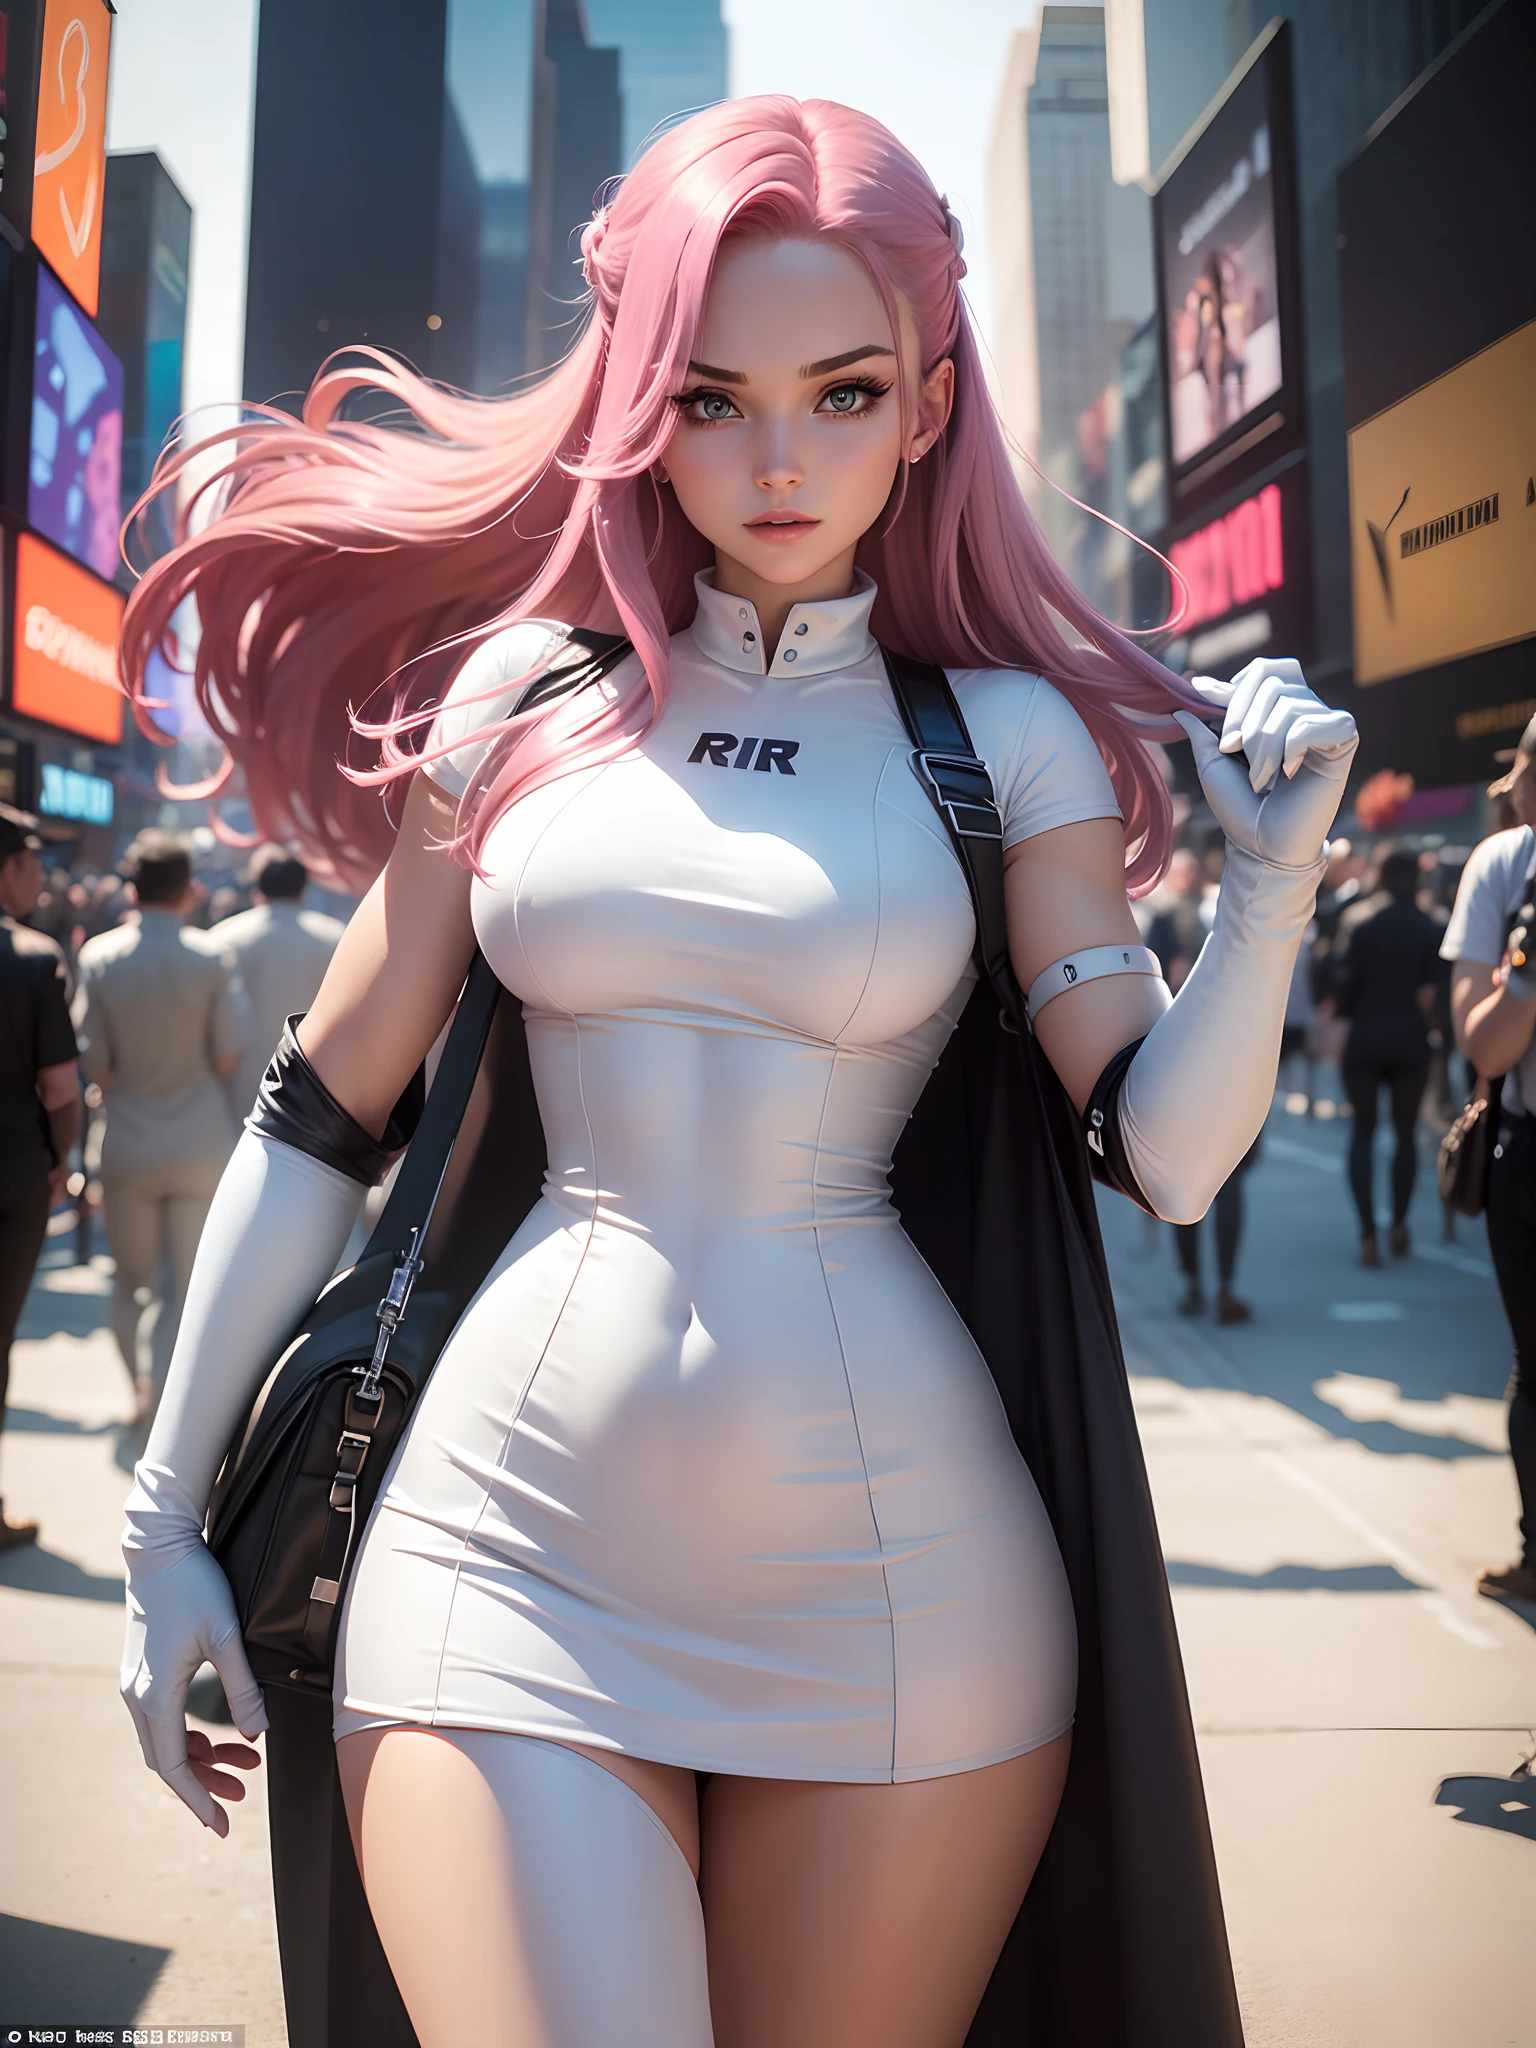 In New York, Time Square, a beautiful woman, 25 years old, style, Jessie is a member of Team Rocket, more specifically part of the Pokémon anime, usually trying to steal Ash's Pikachu. She is typically portrayed as feminine, with large blue eyes, long dark pink hair, a Team Rocket uniform consisting of a short white dress with a large R symbol on the chest, and tall white boots. She also wears white gloves and a red band on her left arm. In New York, (Just a girl: 1.4), (athletic body: 1.4), (hanging breasts: 1.3), (full breasts: 1.10), (realism: 1.5), (Realisitc: 1.4), (Absurdity: 1.4) , 8k, ultra-detailed, Detailed beautiful woman, a young girl, (Viewer facing: 1.2),